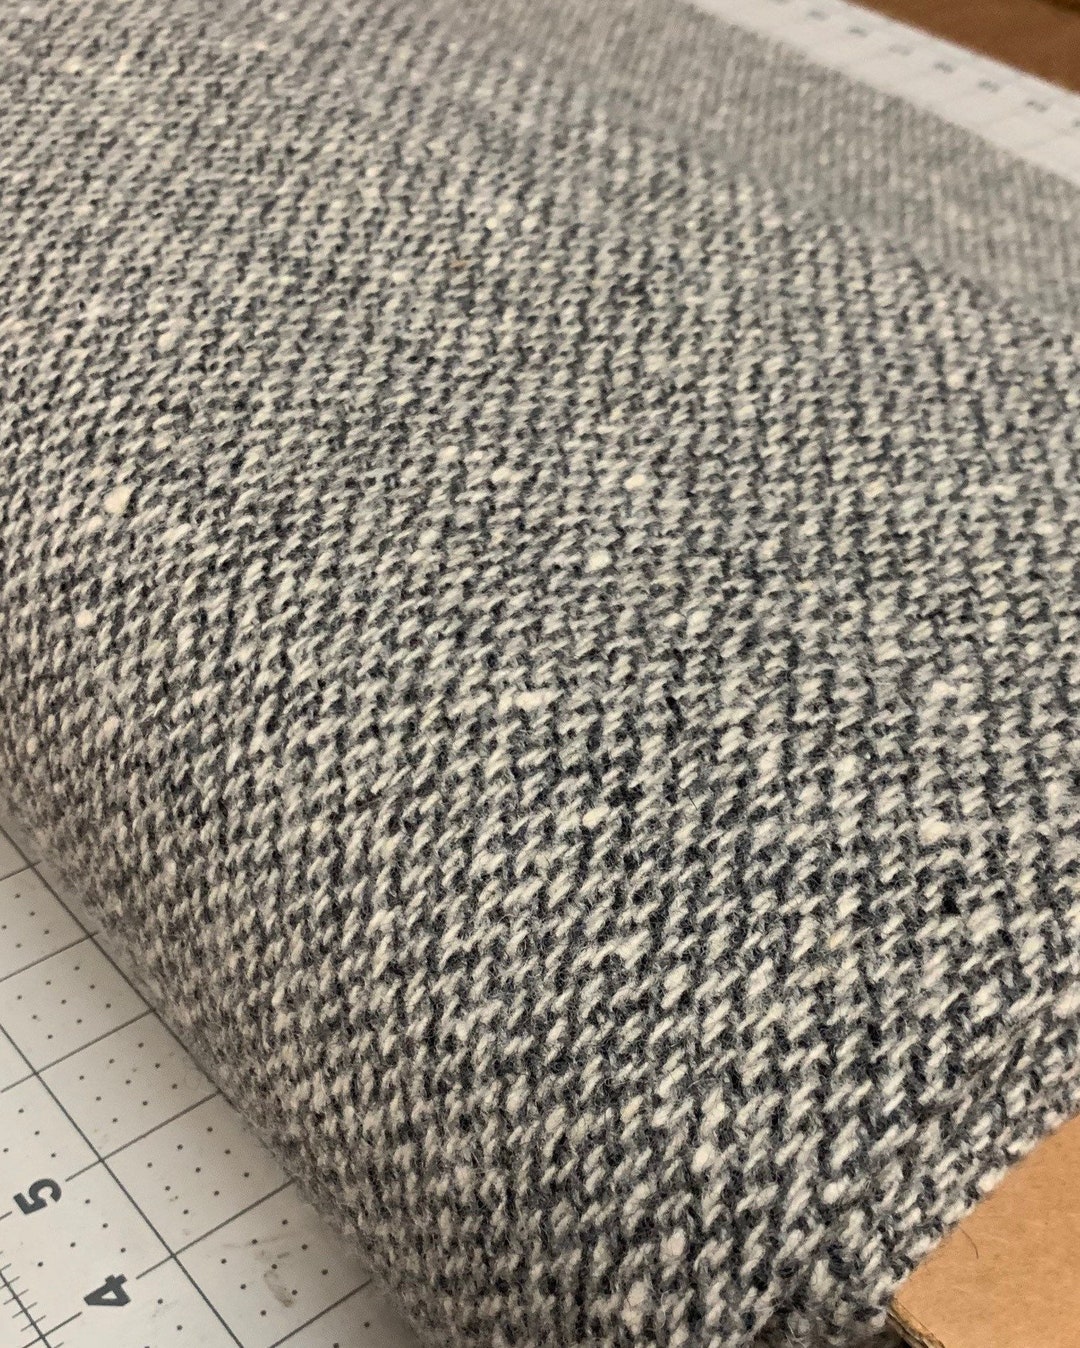 Wool FABRIC by the yard, coat or upholstery material, Gray/Natural